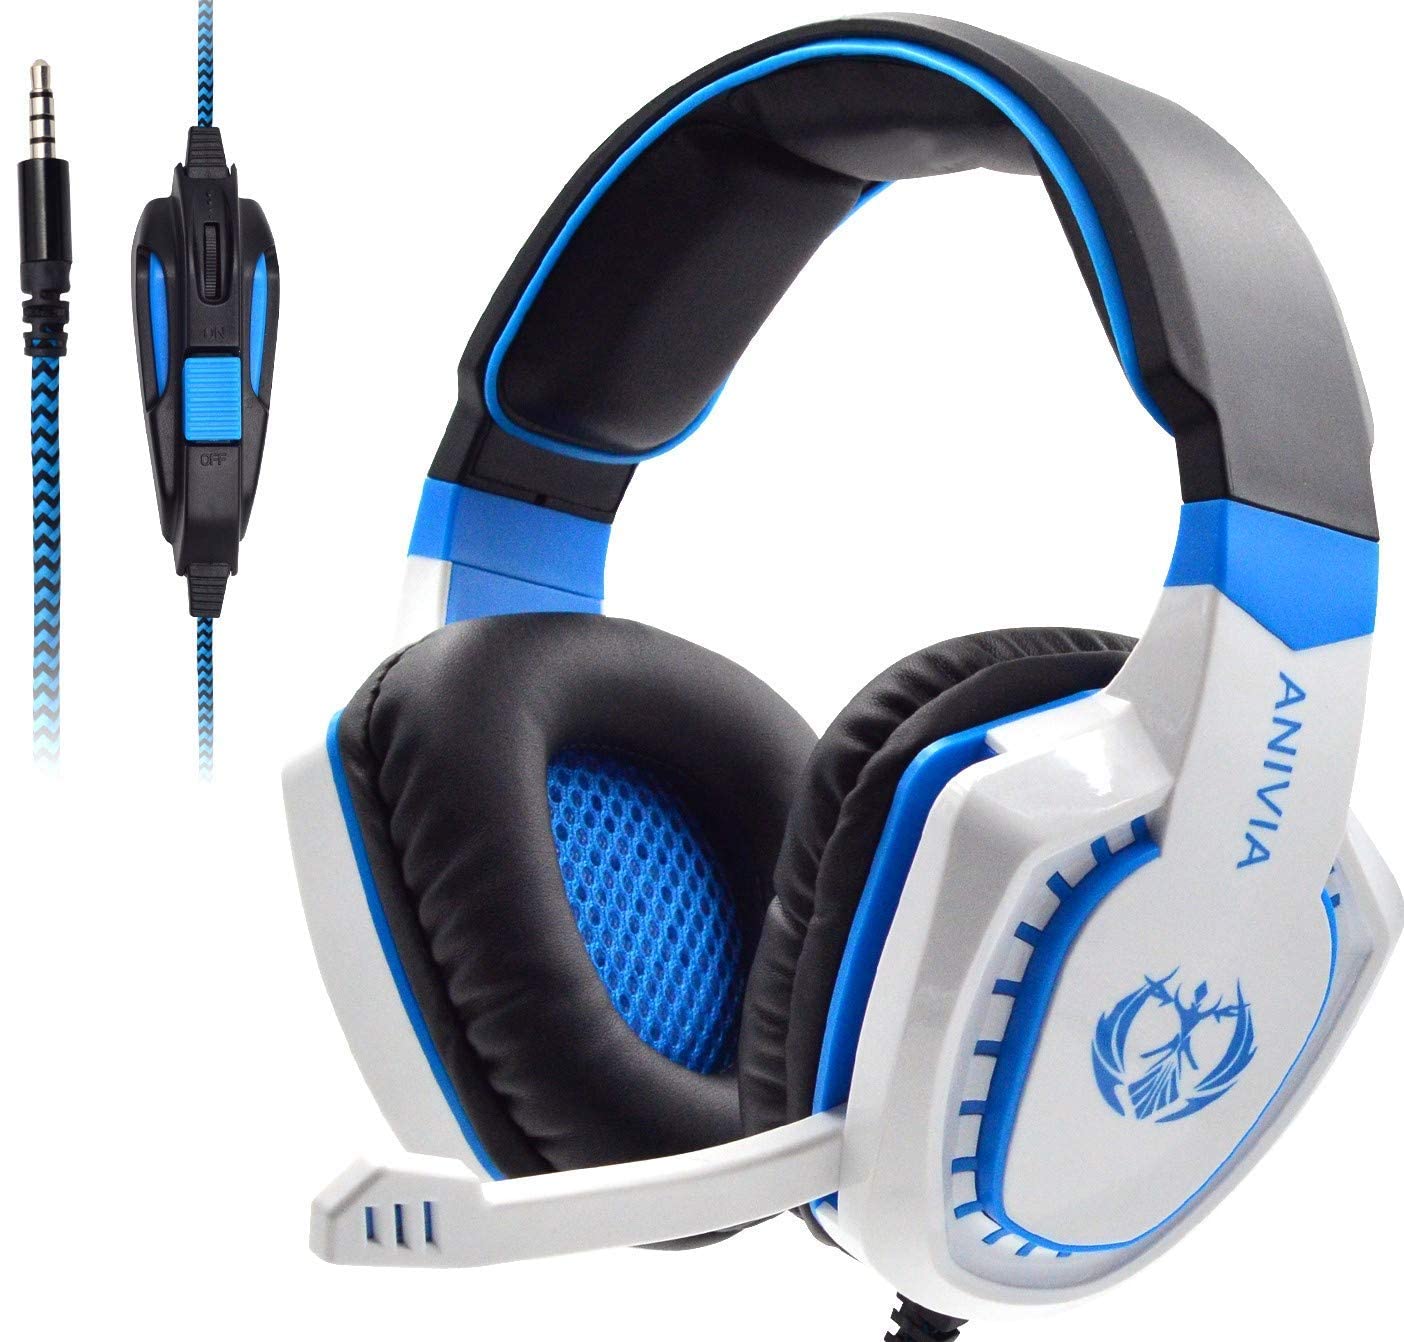 Over Ear Headphones Wired with Microphone - Stereo Surround Sound Headsets Gaming Headset with HD Mic, Bass, Noise Isolating, Volume-Control for Multi-Platforms